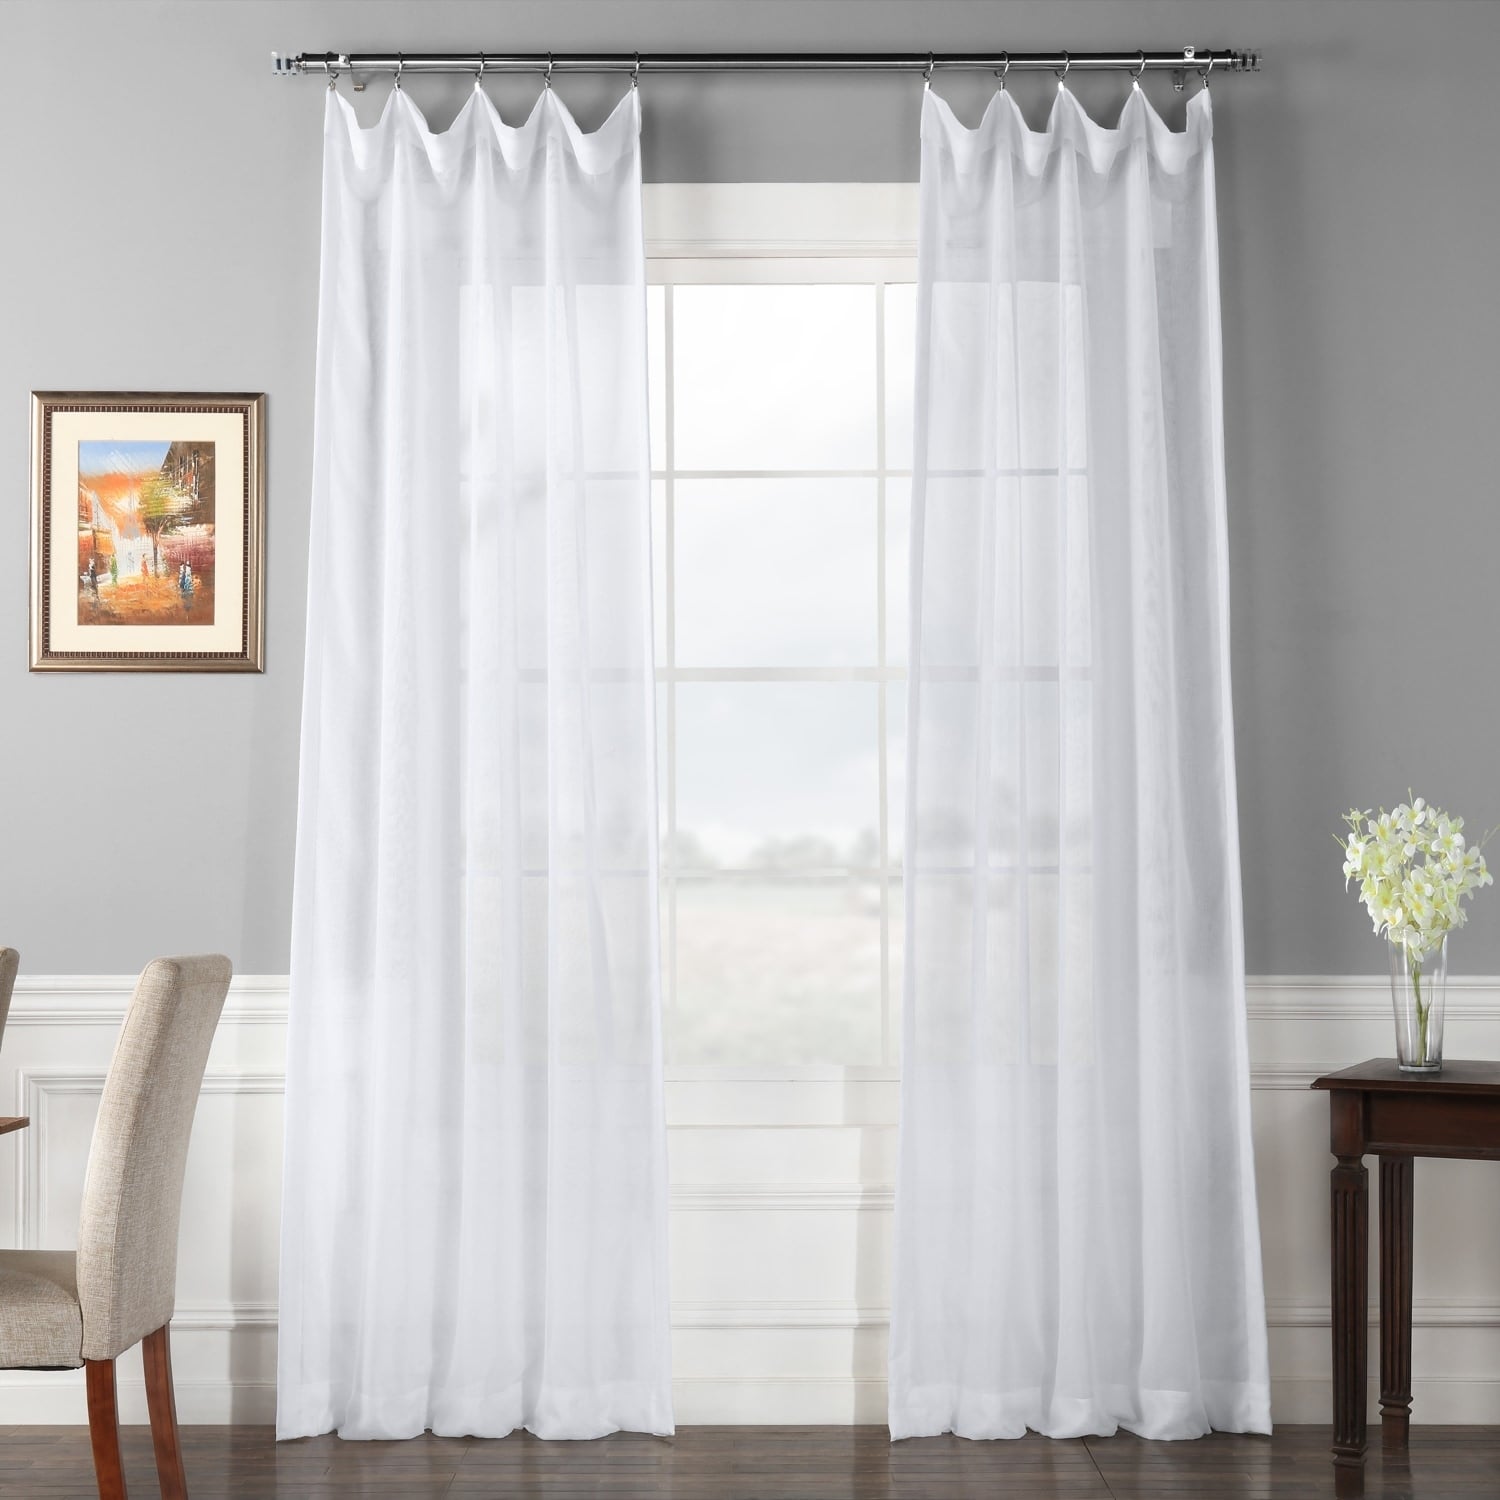 Eff Signature White Double Layer Sheer Curtain Panel White Size 50 x 108